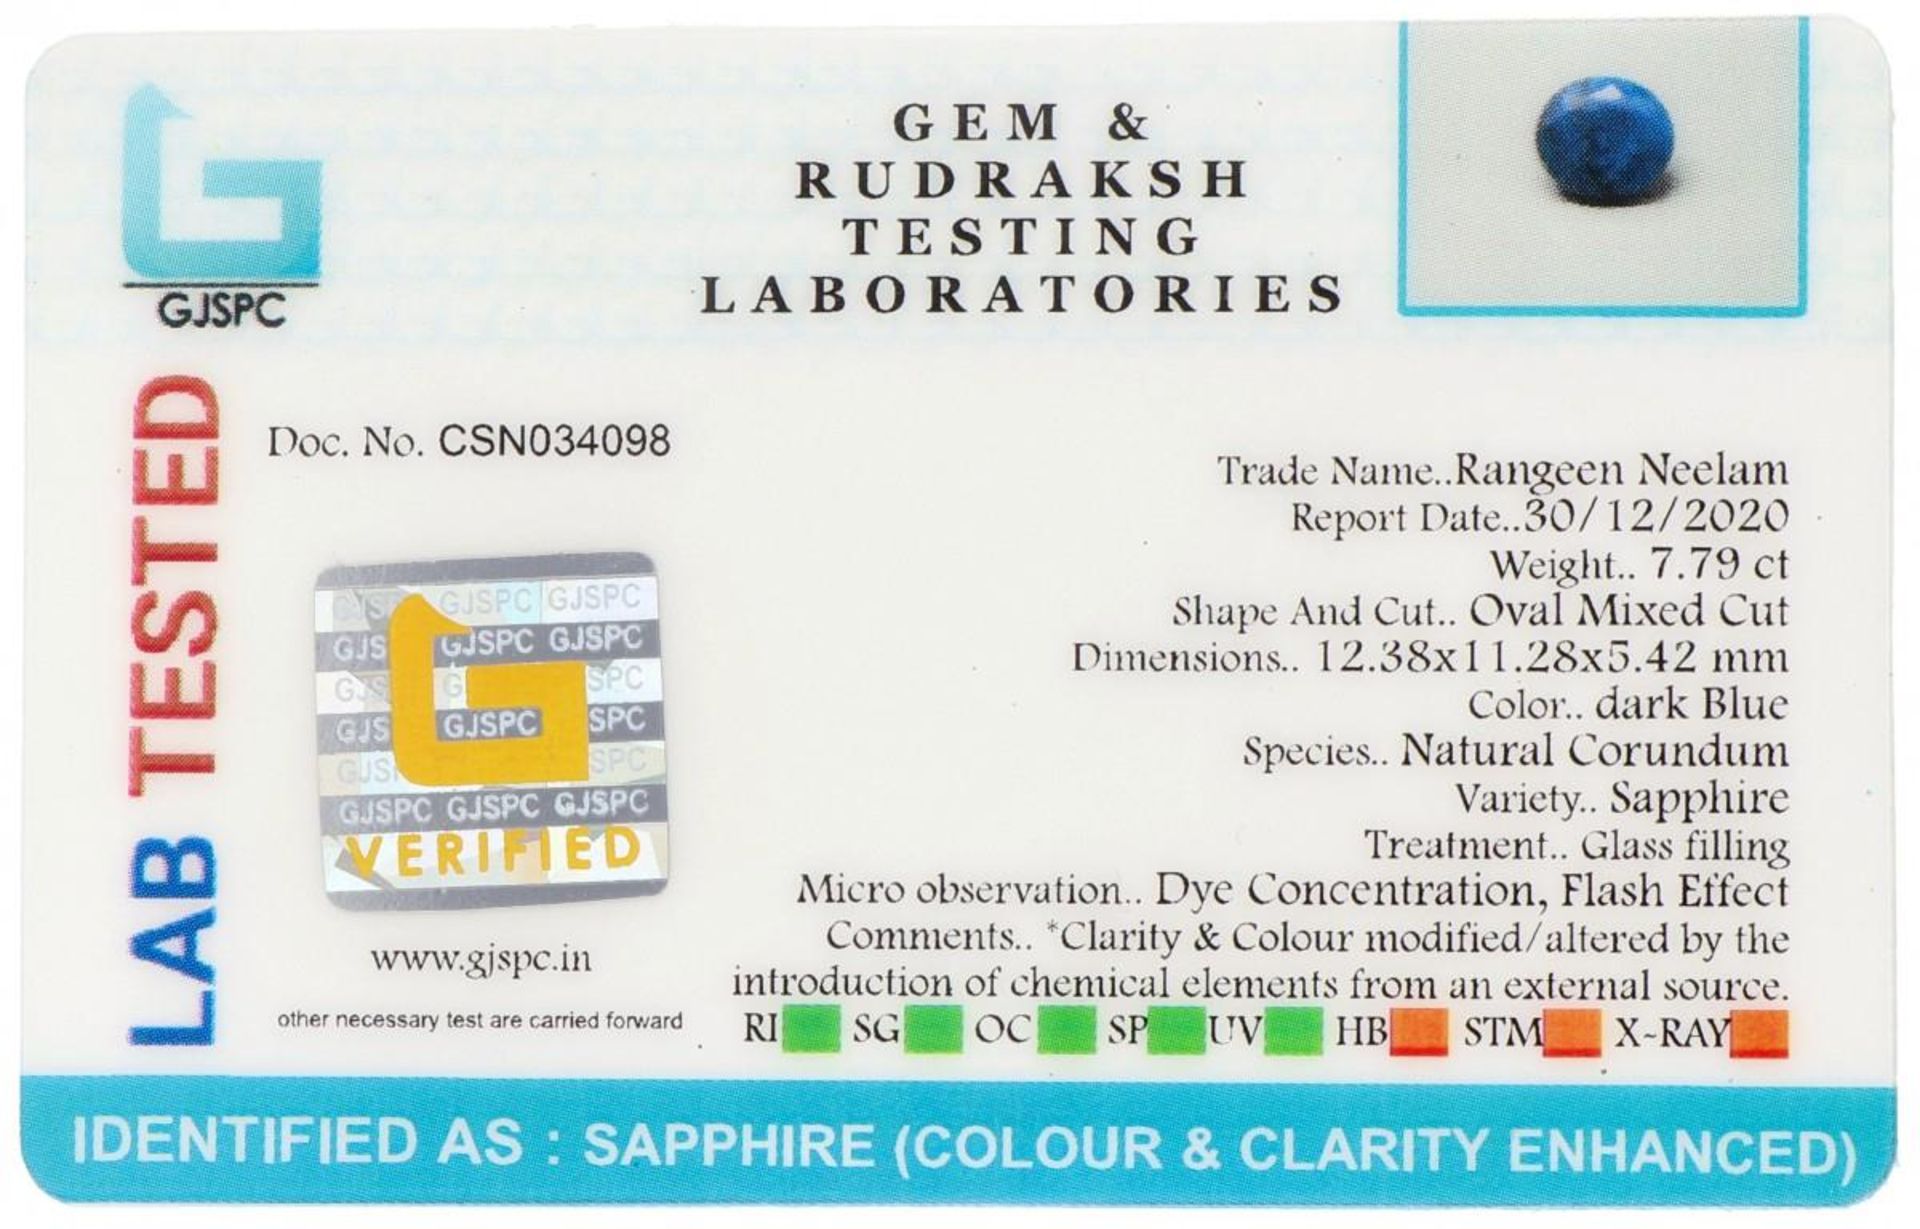 GJSPC Certified Natural Sapphire Gemstone 7.79 ct. - Image 3 of 3